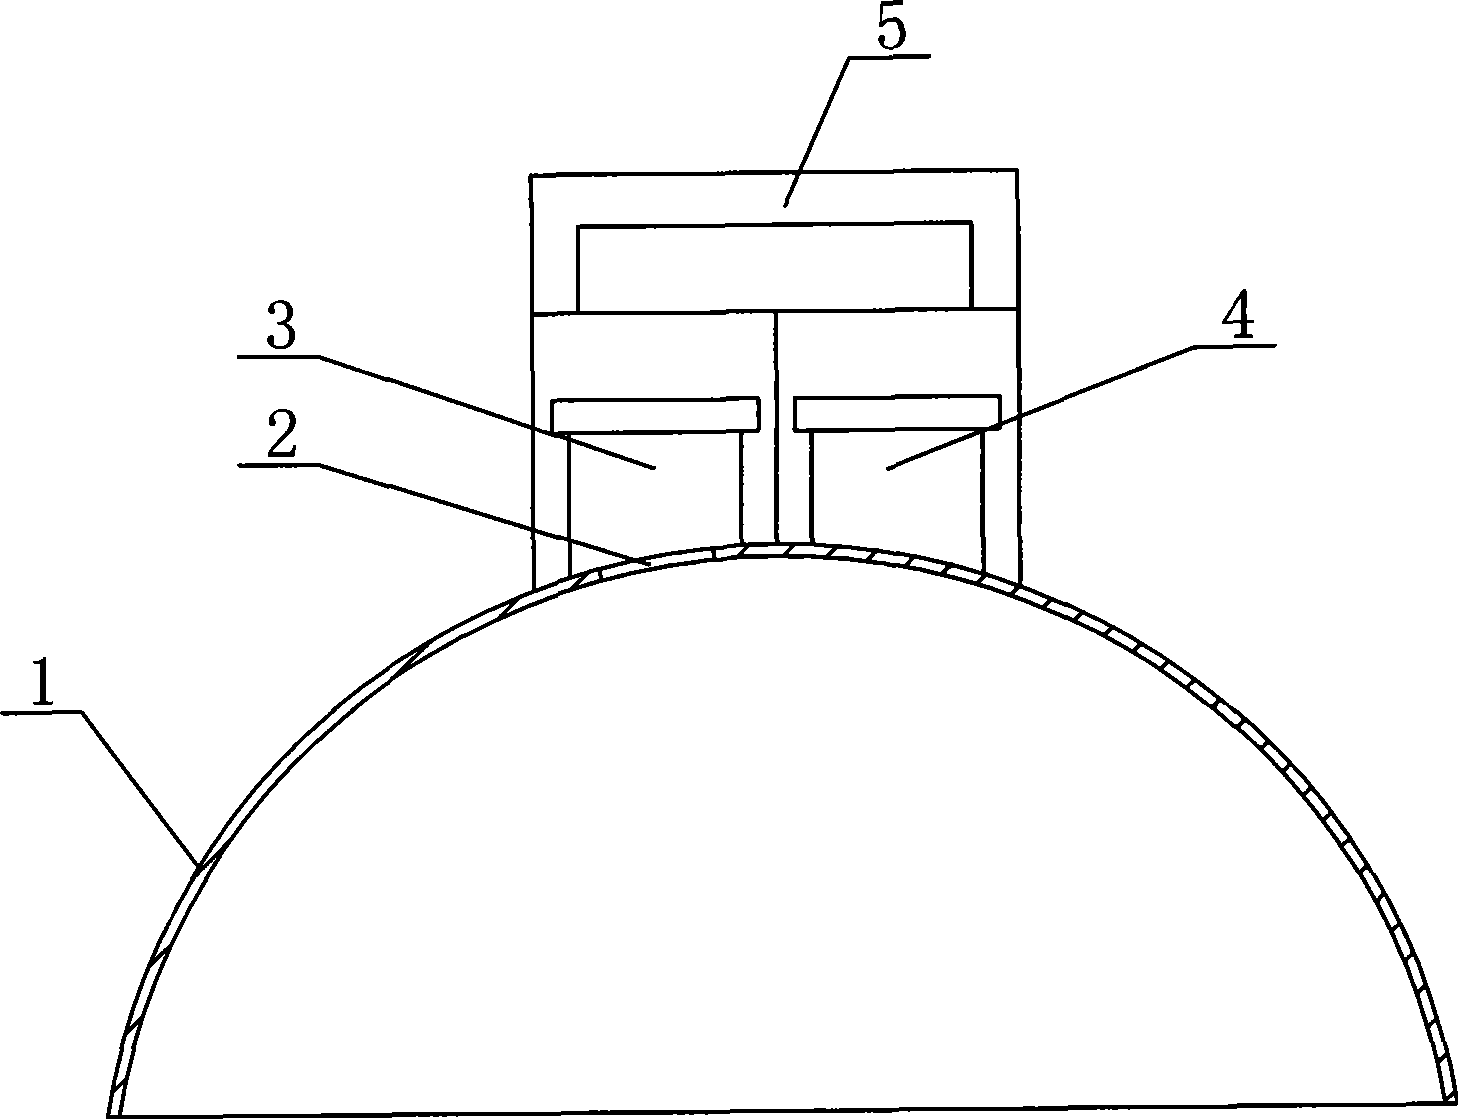 Interior partial discharge detection device for gas insulation composite apparatus